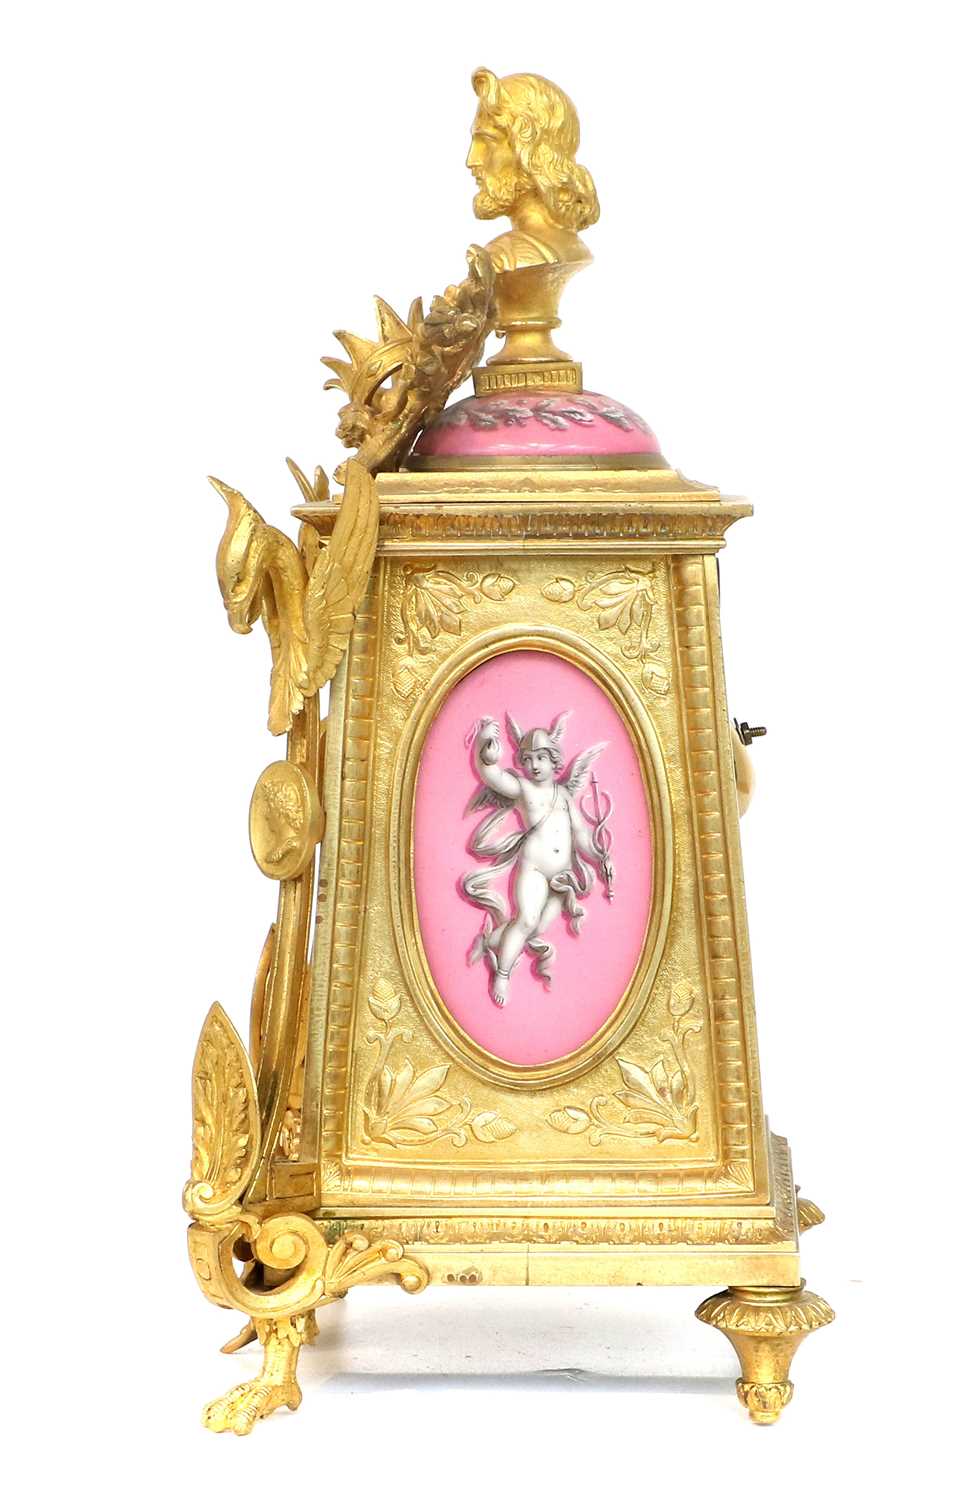 A Gilt Metal and Porcelain Mounted Striking Mantel Clock, circa 1890, case surmounted with a bust of - Image 4 of 7